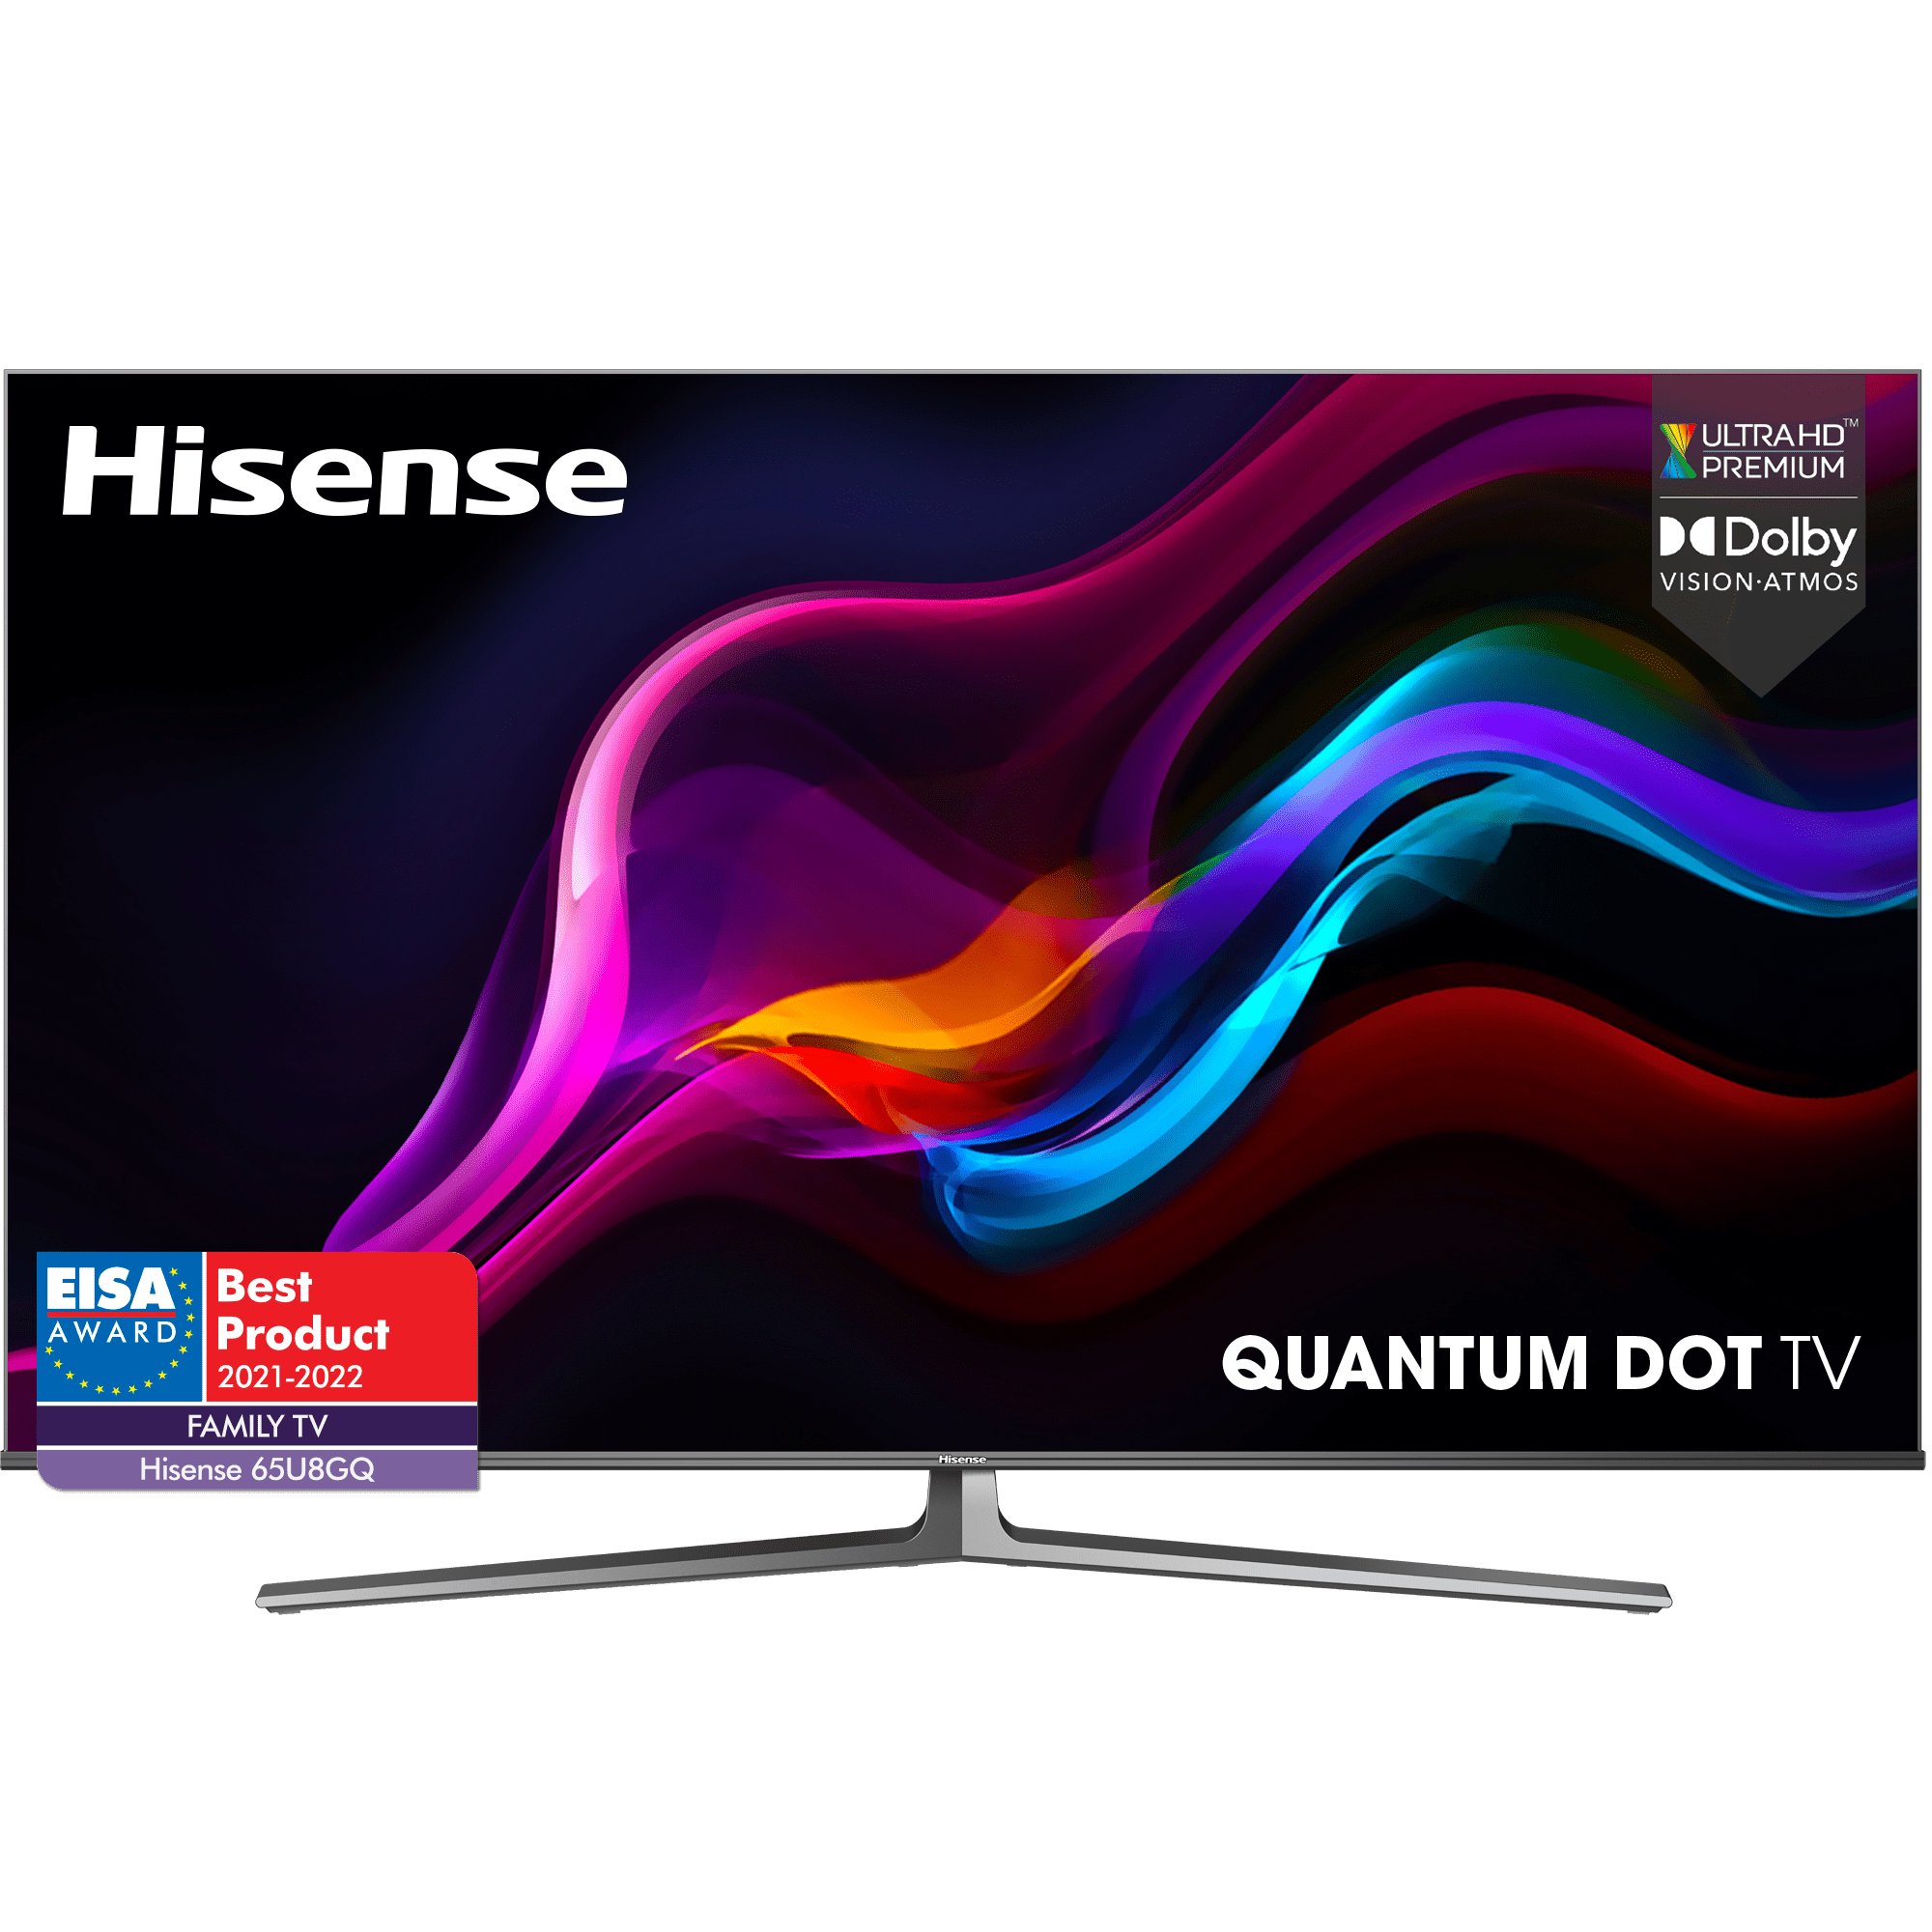 Hisense U8g 4k Qled Tv 2021 Specifications Reviews Price Comparison And More Neofiliac 9046